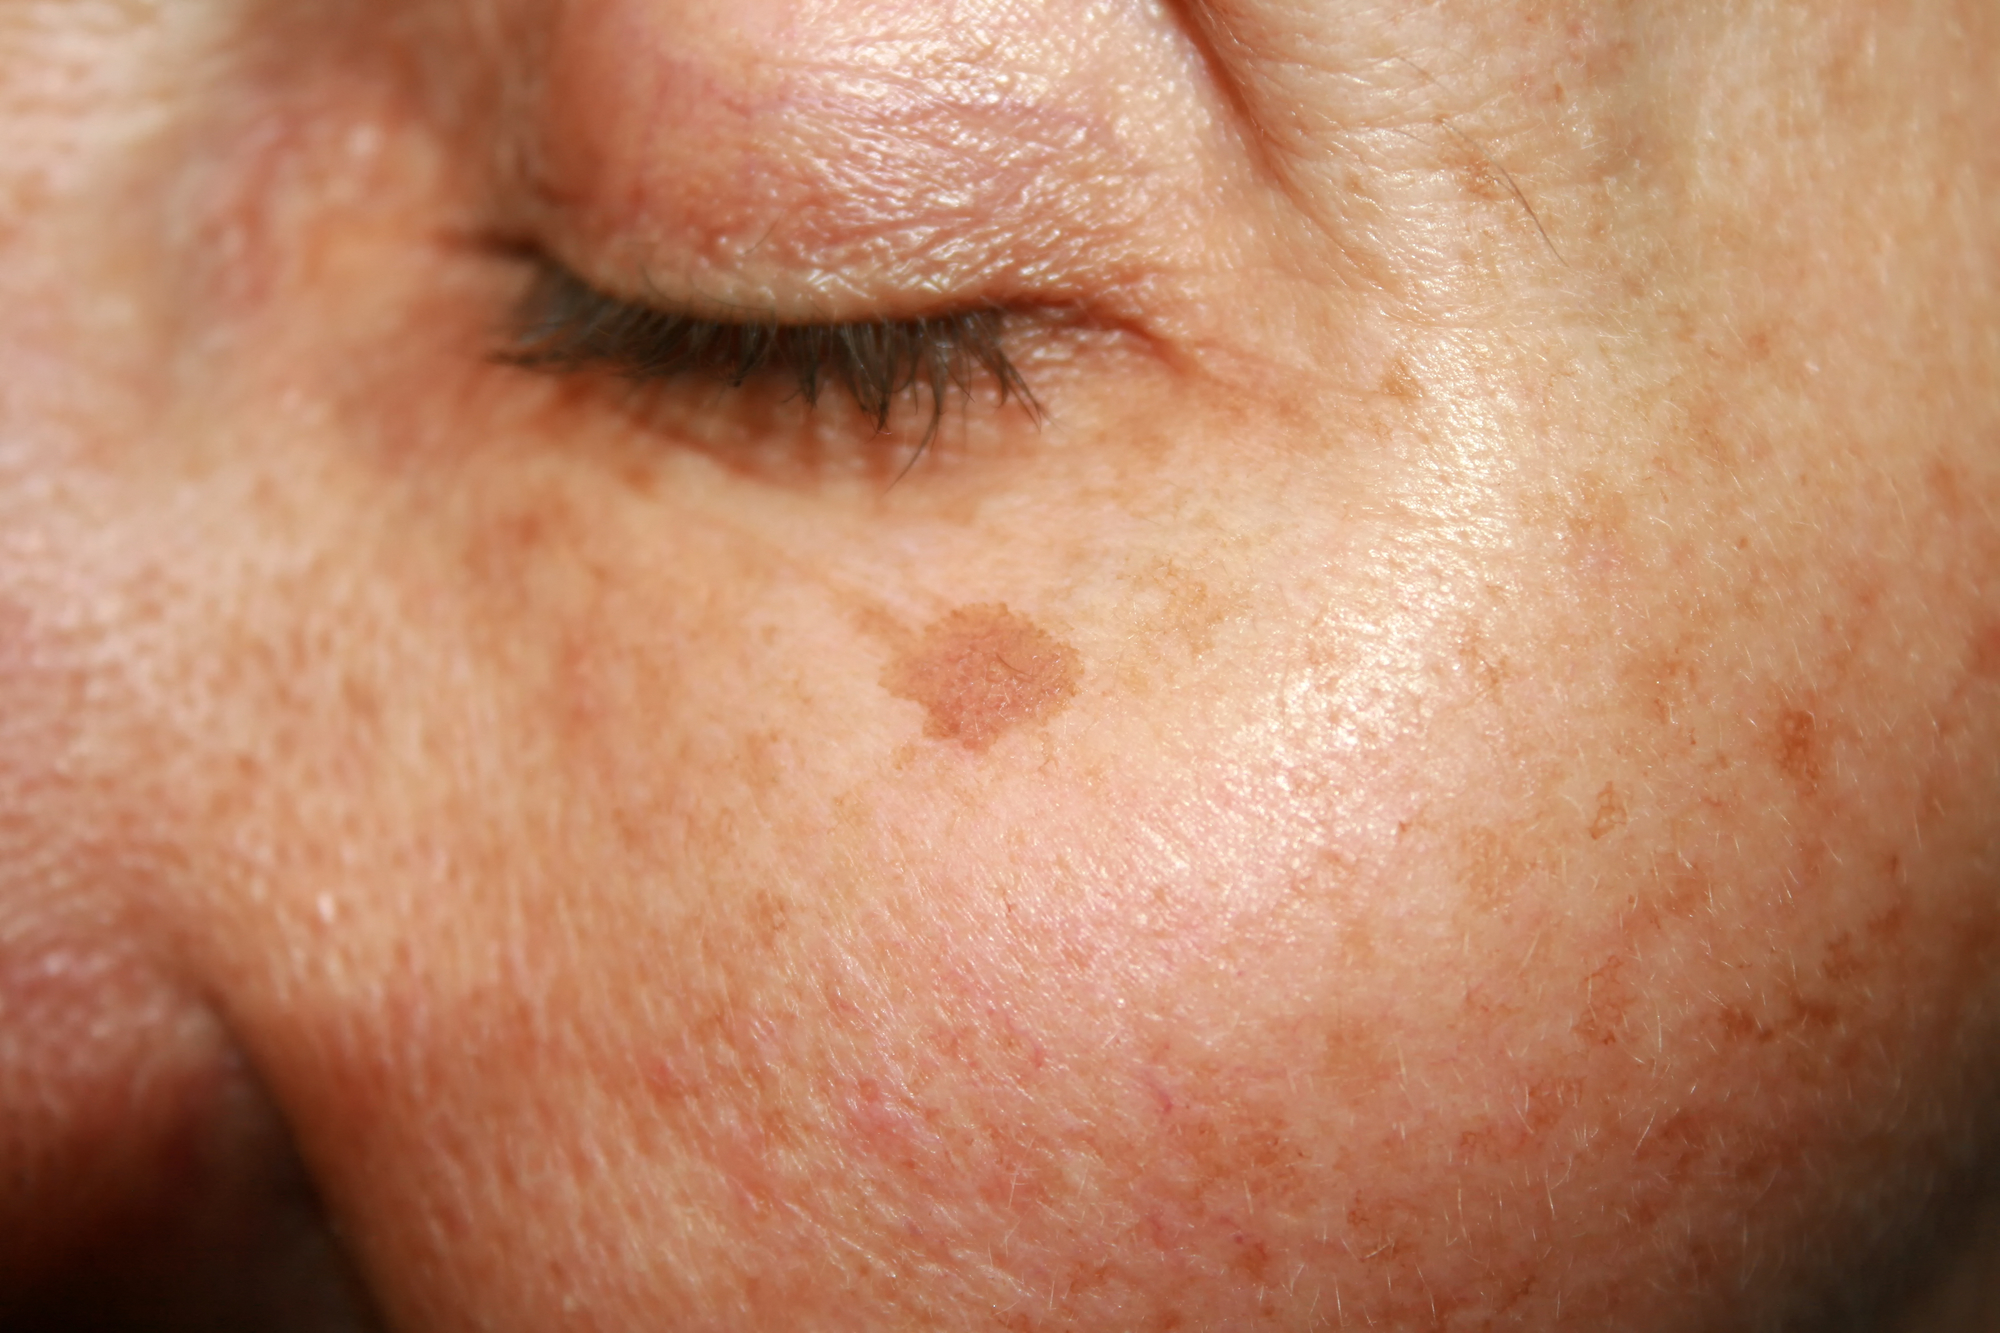 Age/Brown Spot Removal, Intense Pulsed Light - IPL